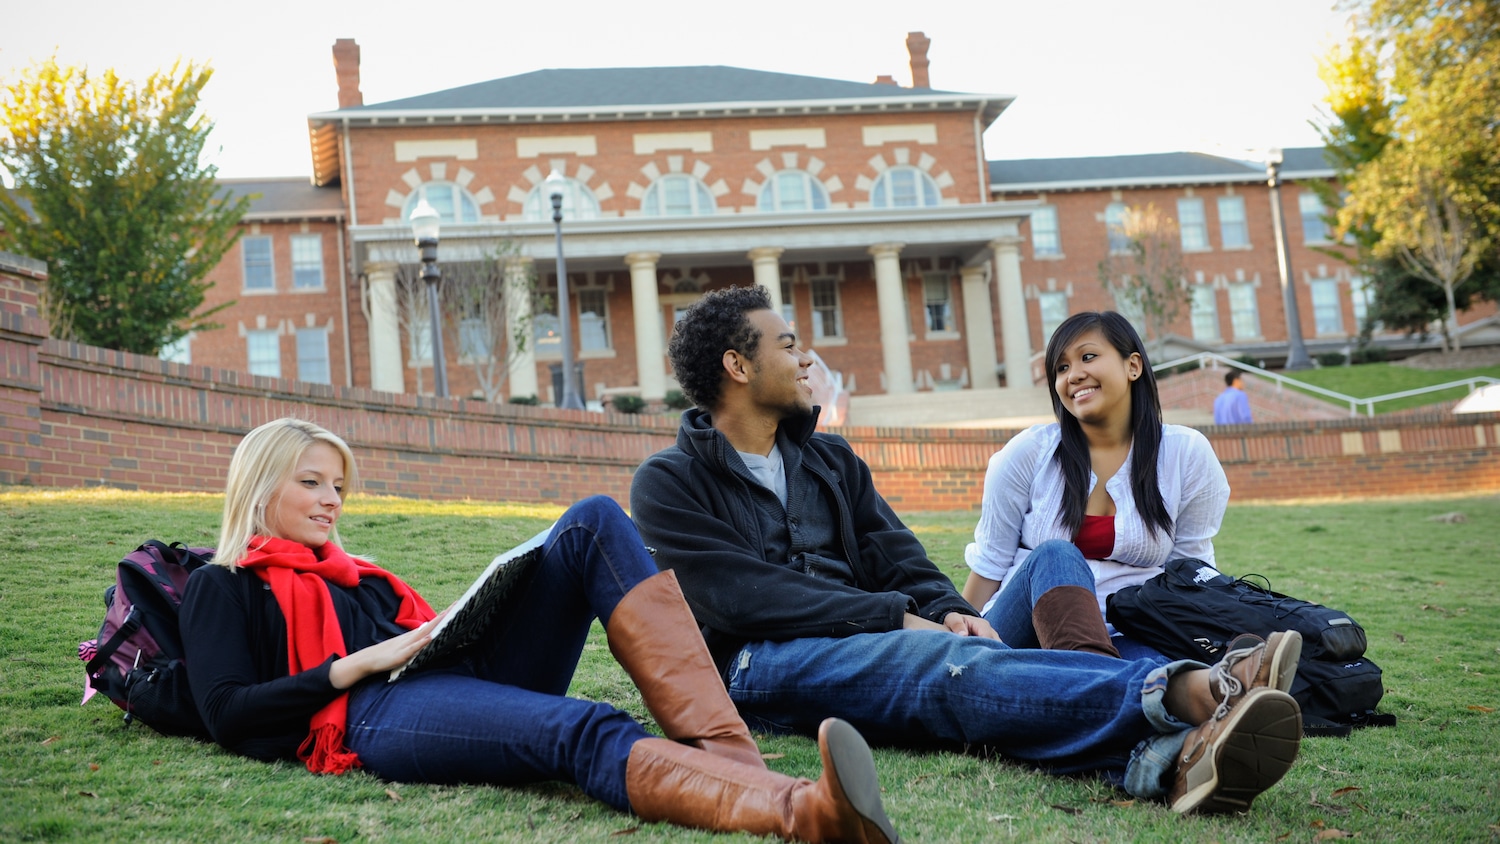 Students share conversation while sitting in the Court of Carolinas in front of the 1911 building.